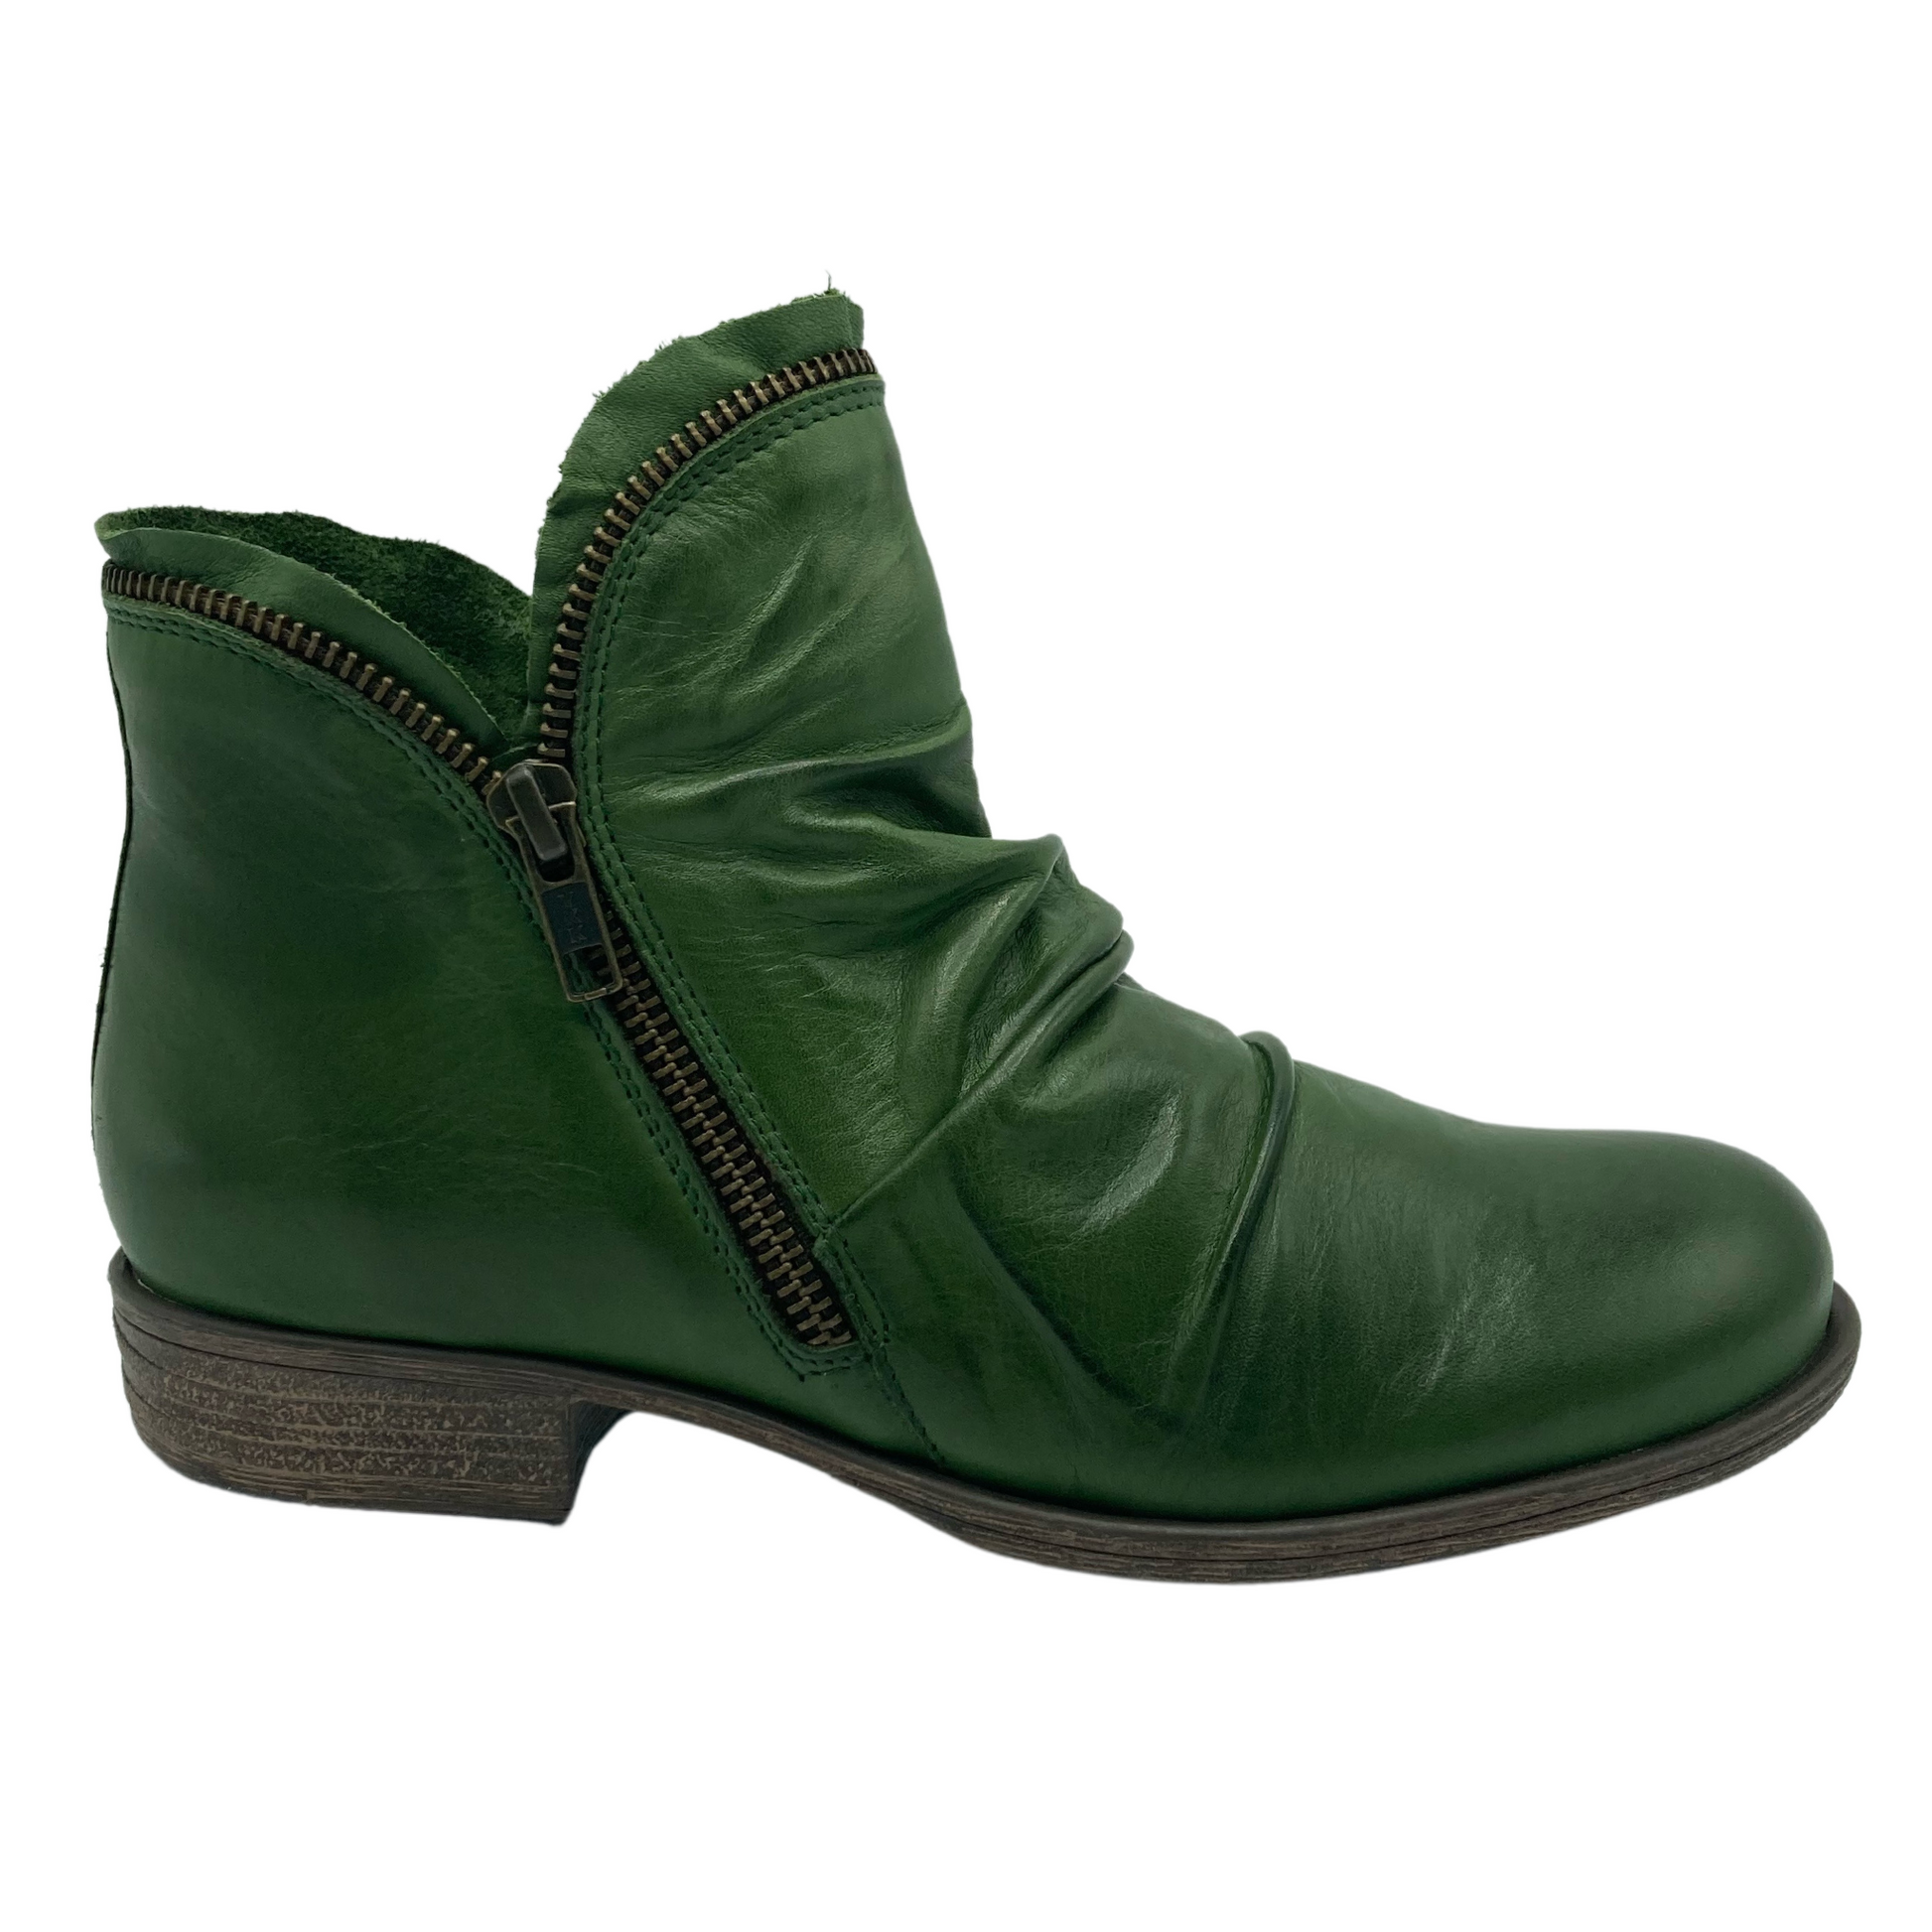 Right facing view of green leather ankle boot with zipper detail and short heel